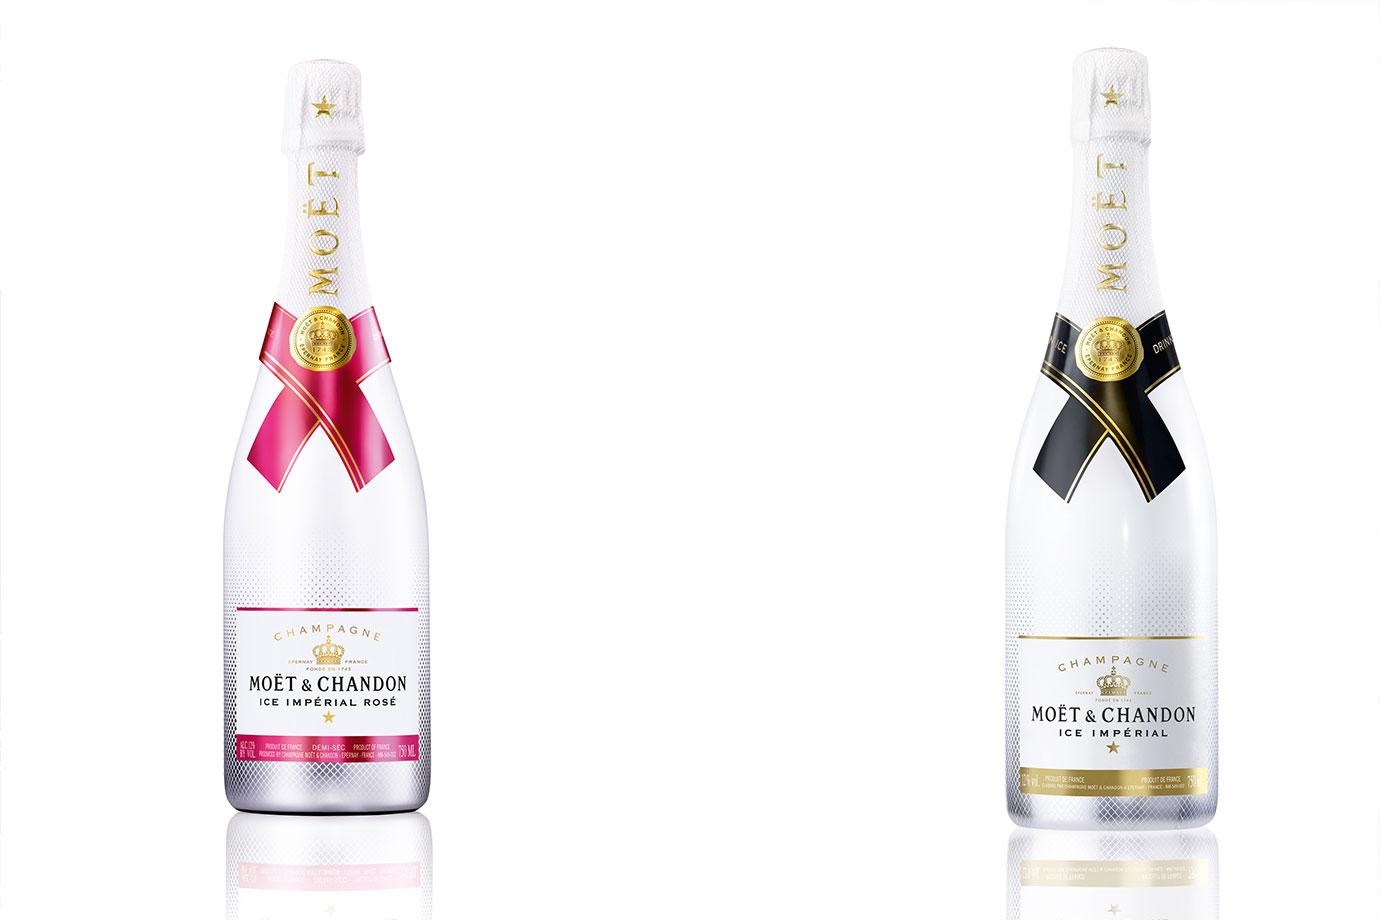 Universal Fine Wine and Spirits - Moet & Chandon Ice Imperial